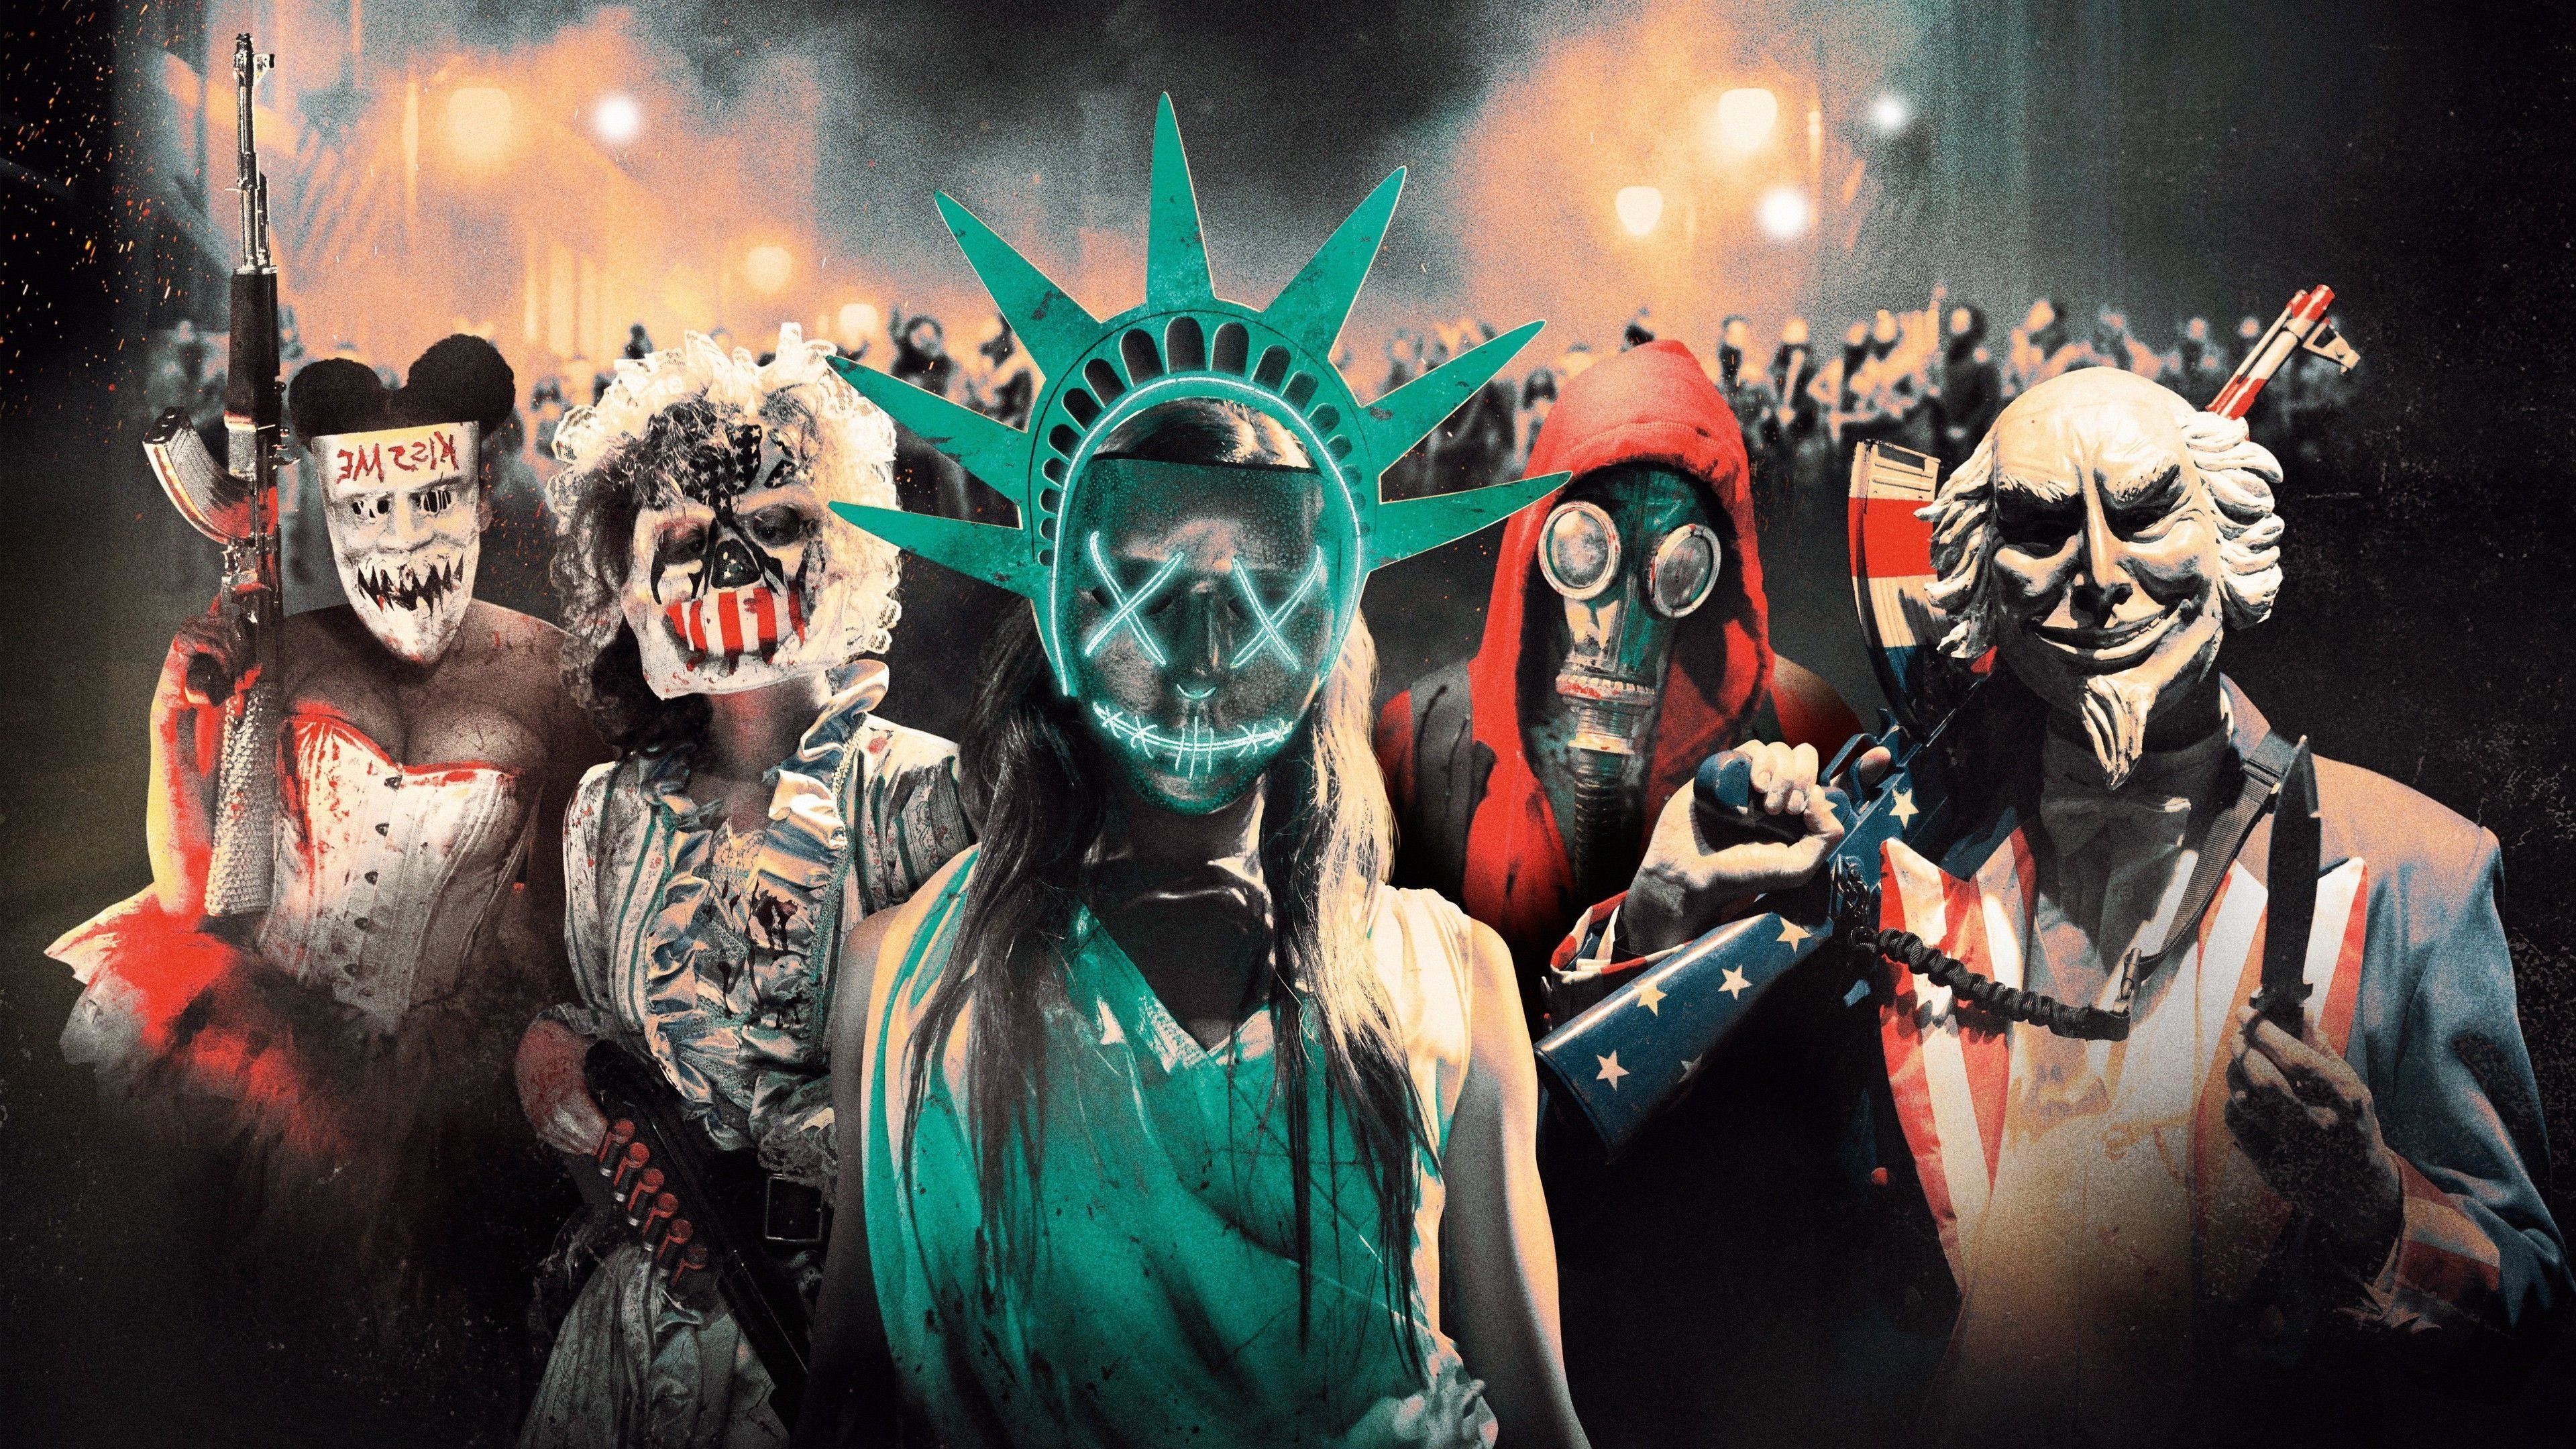 The Purge Election Year phone wallpaper 1080P 2k 4k Full HD Wallpapers  Backgrounds Free Download  Wallpaper Crafter